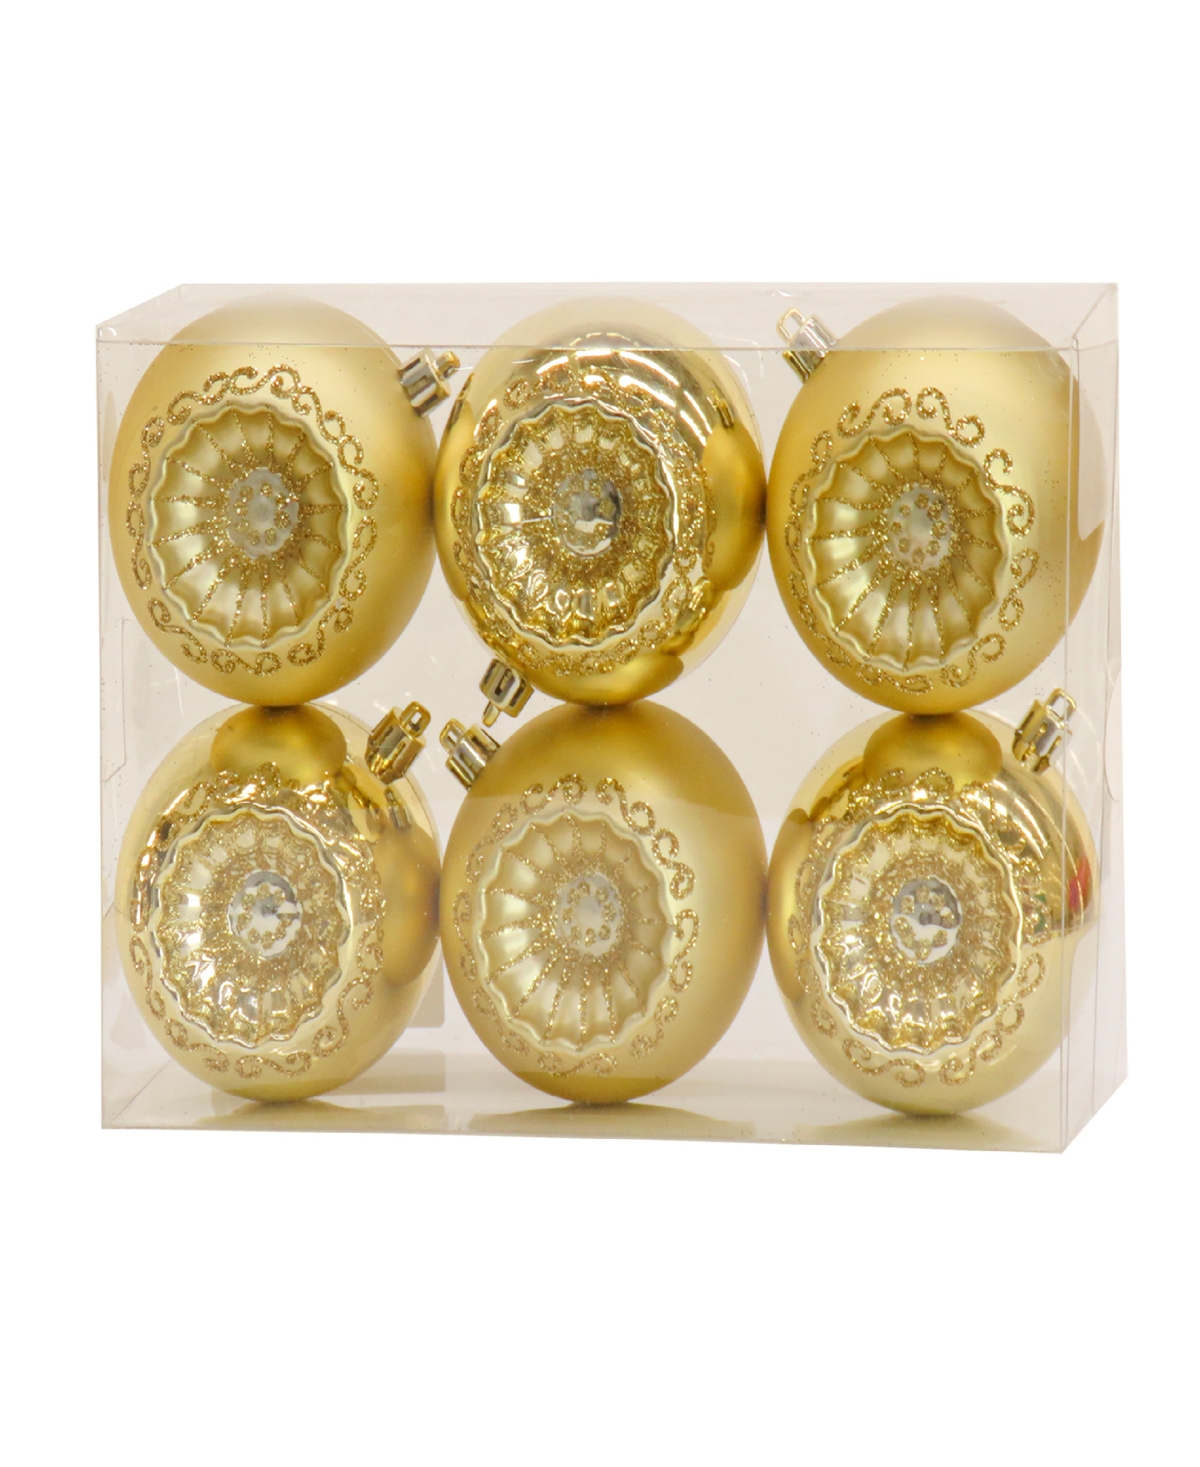 First Traditions 6-Piece Shatterproof Glittering Ornaments - Gold